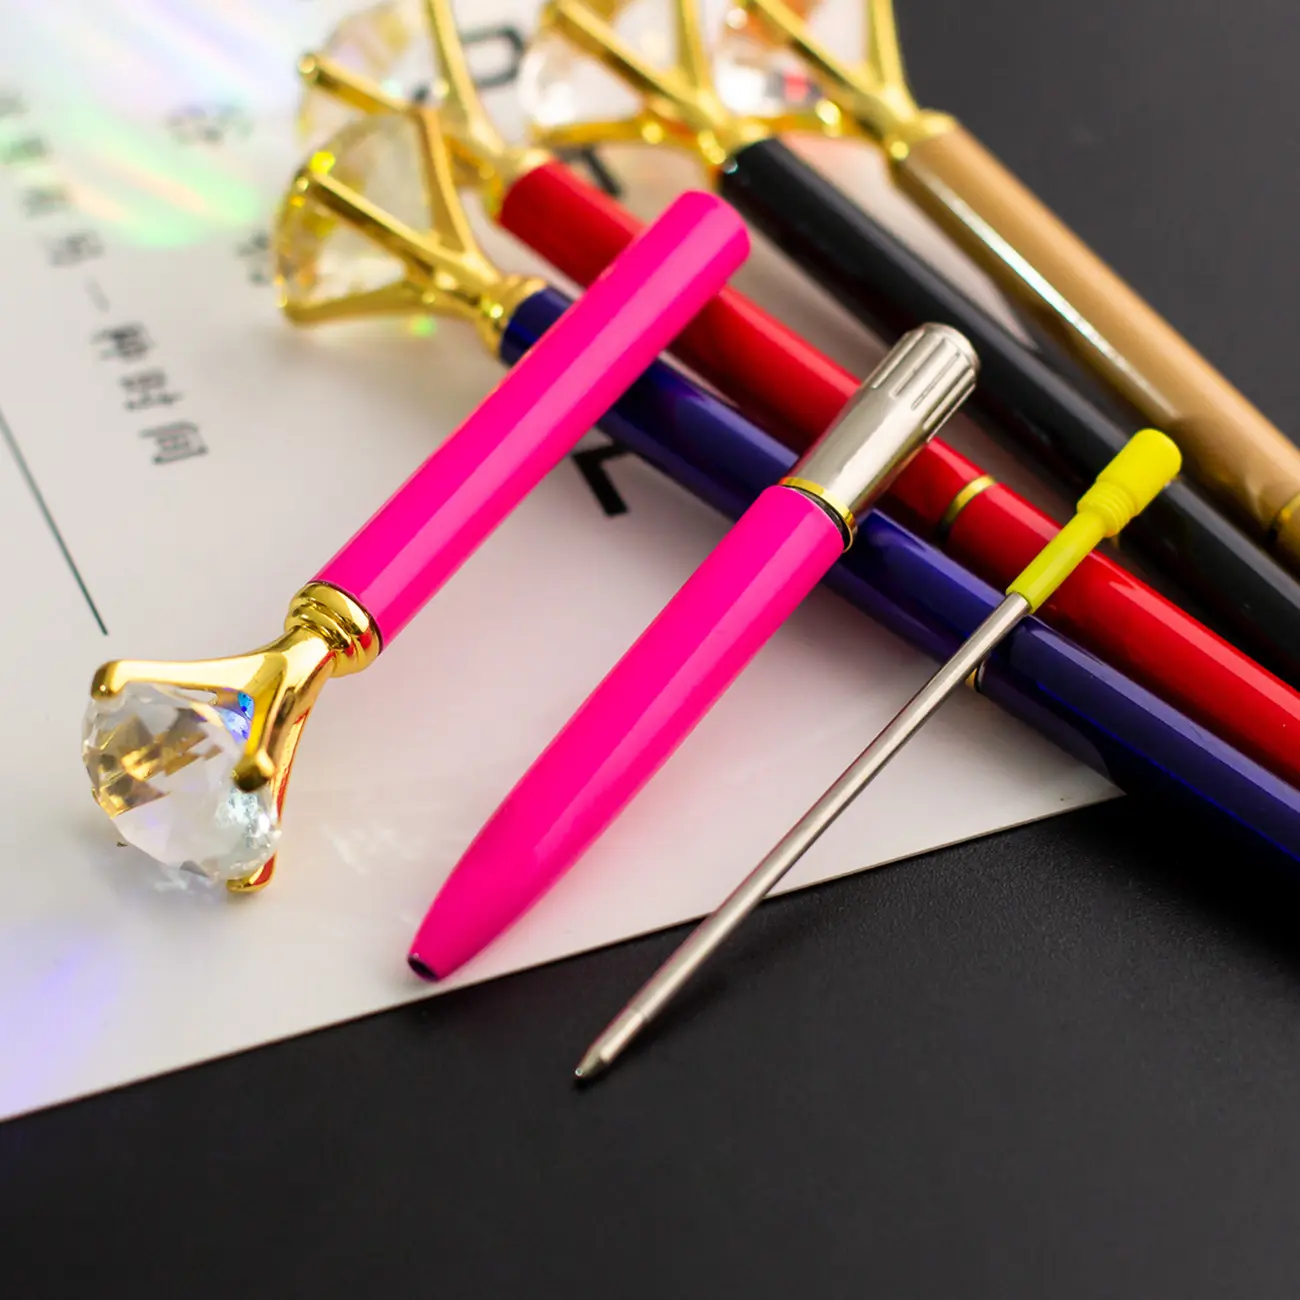 Personalised Crystal Diamond Metal Ballpoint Pen Ball Pen With Colorful Light Led Tip